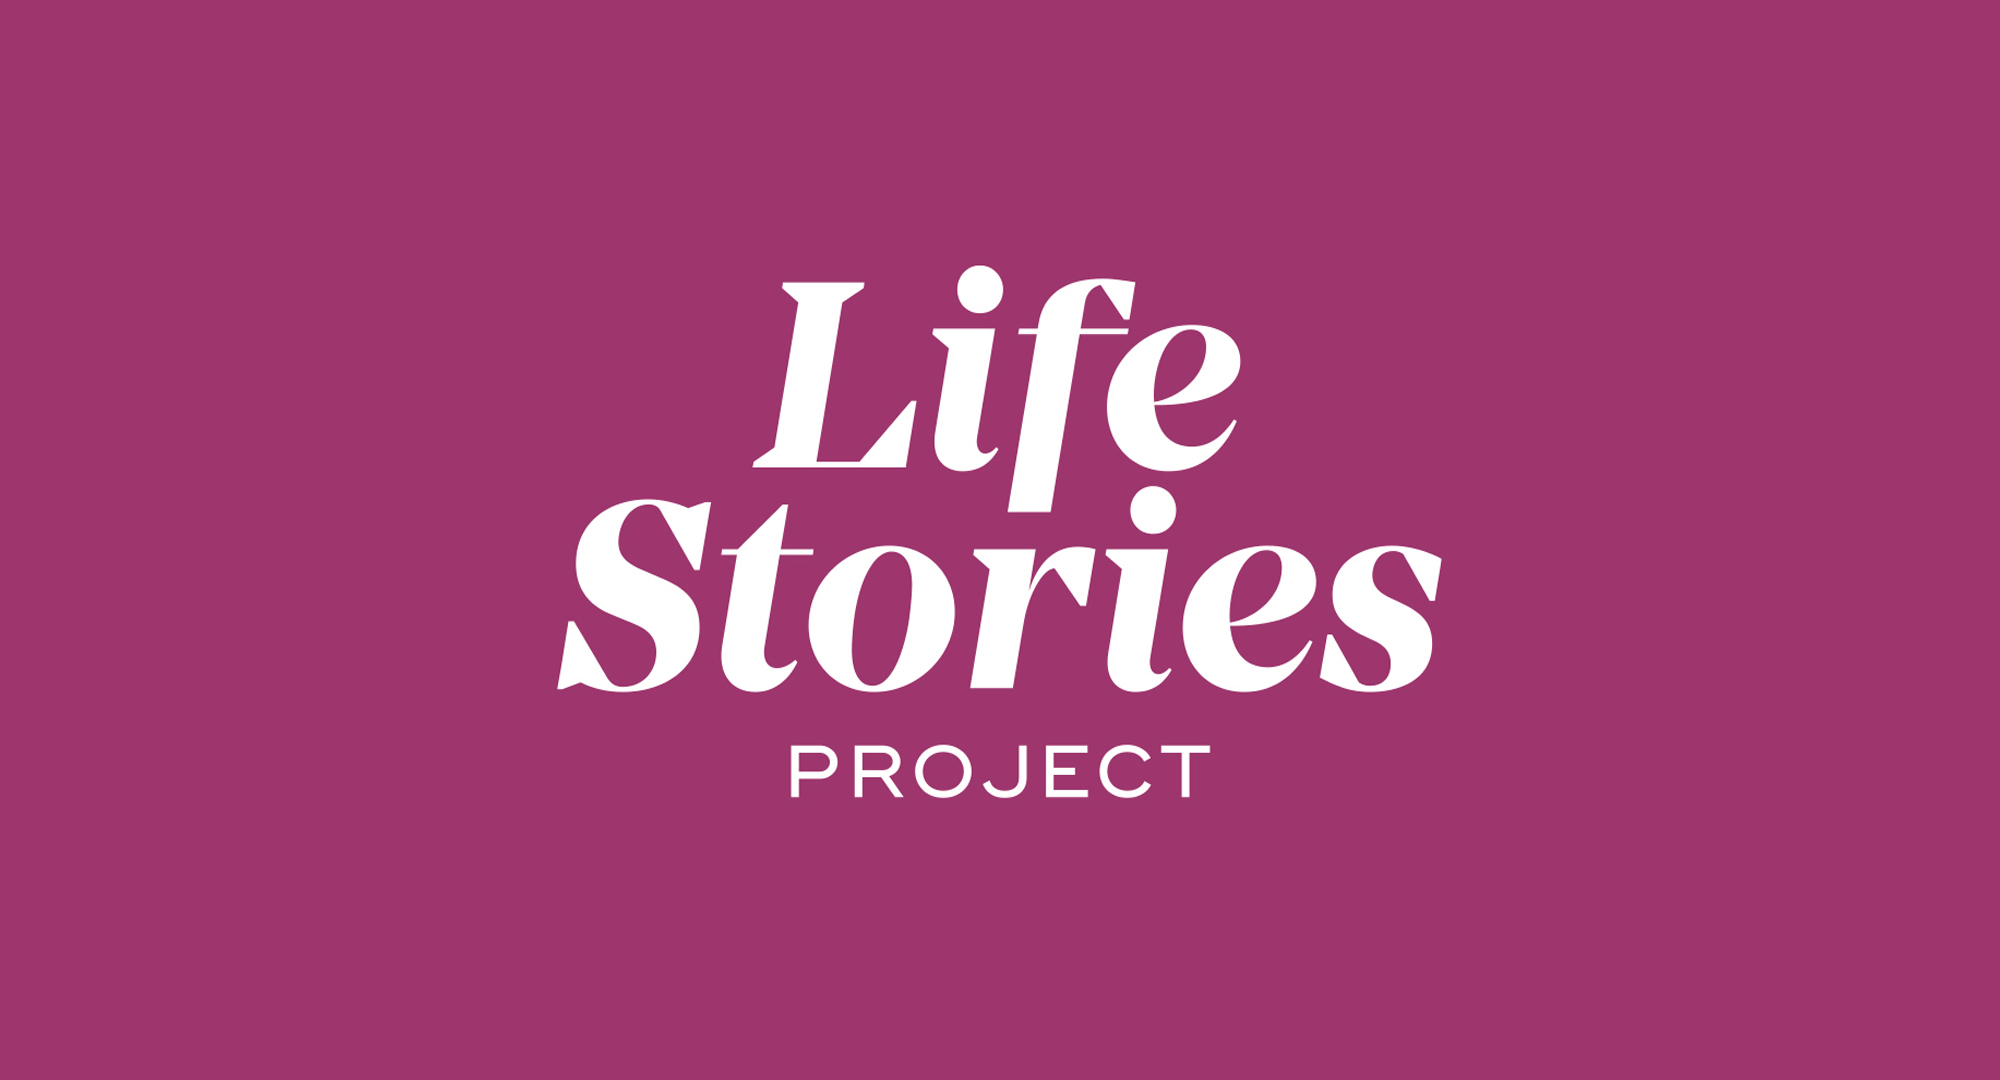 Branding and print design for the Life Stories Project.